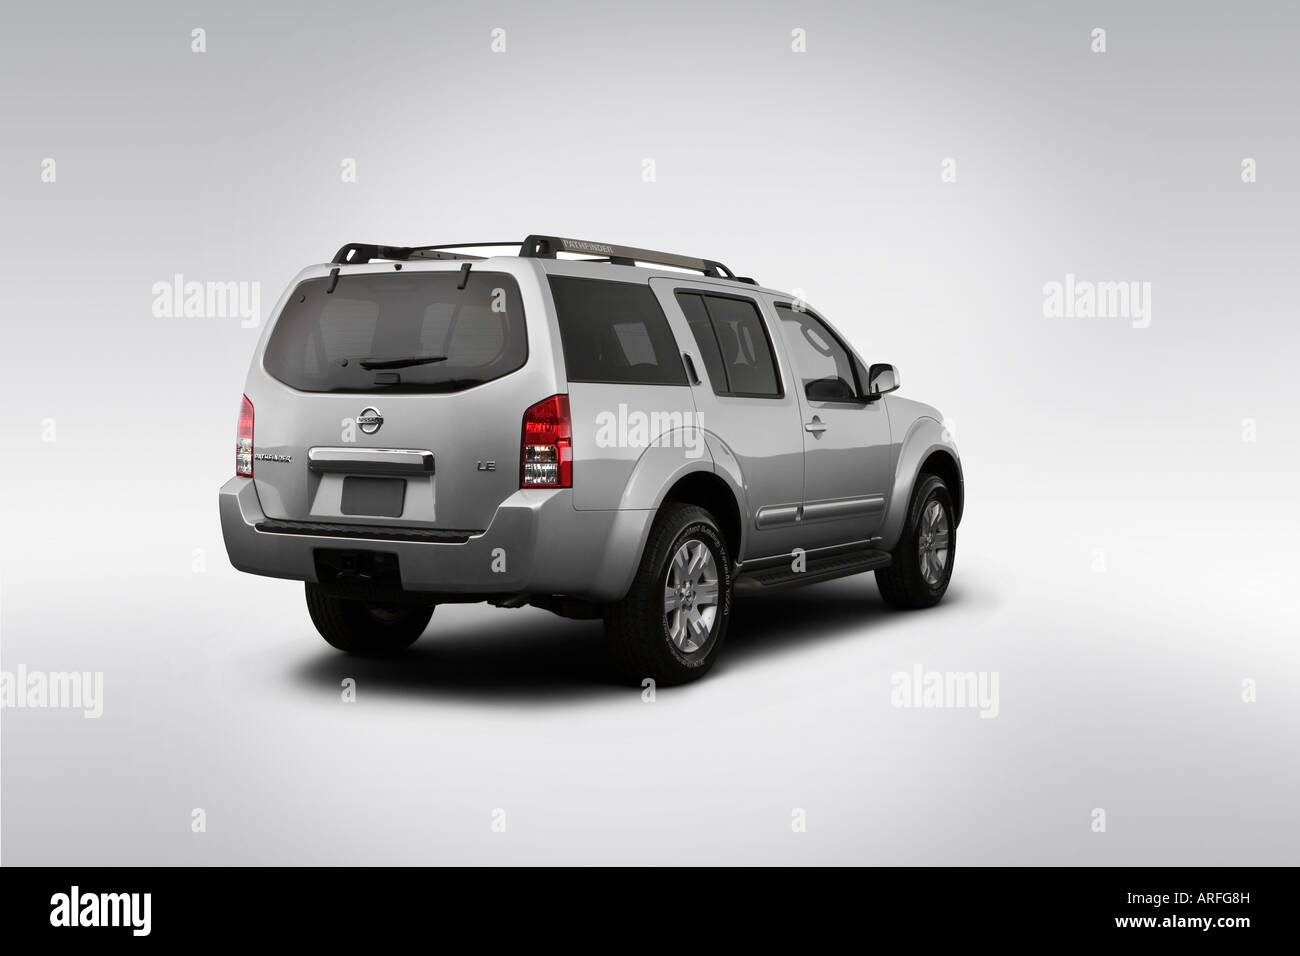 2007 Nissan Pathfinder LE in Silver - Rear angle view Stock Photo